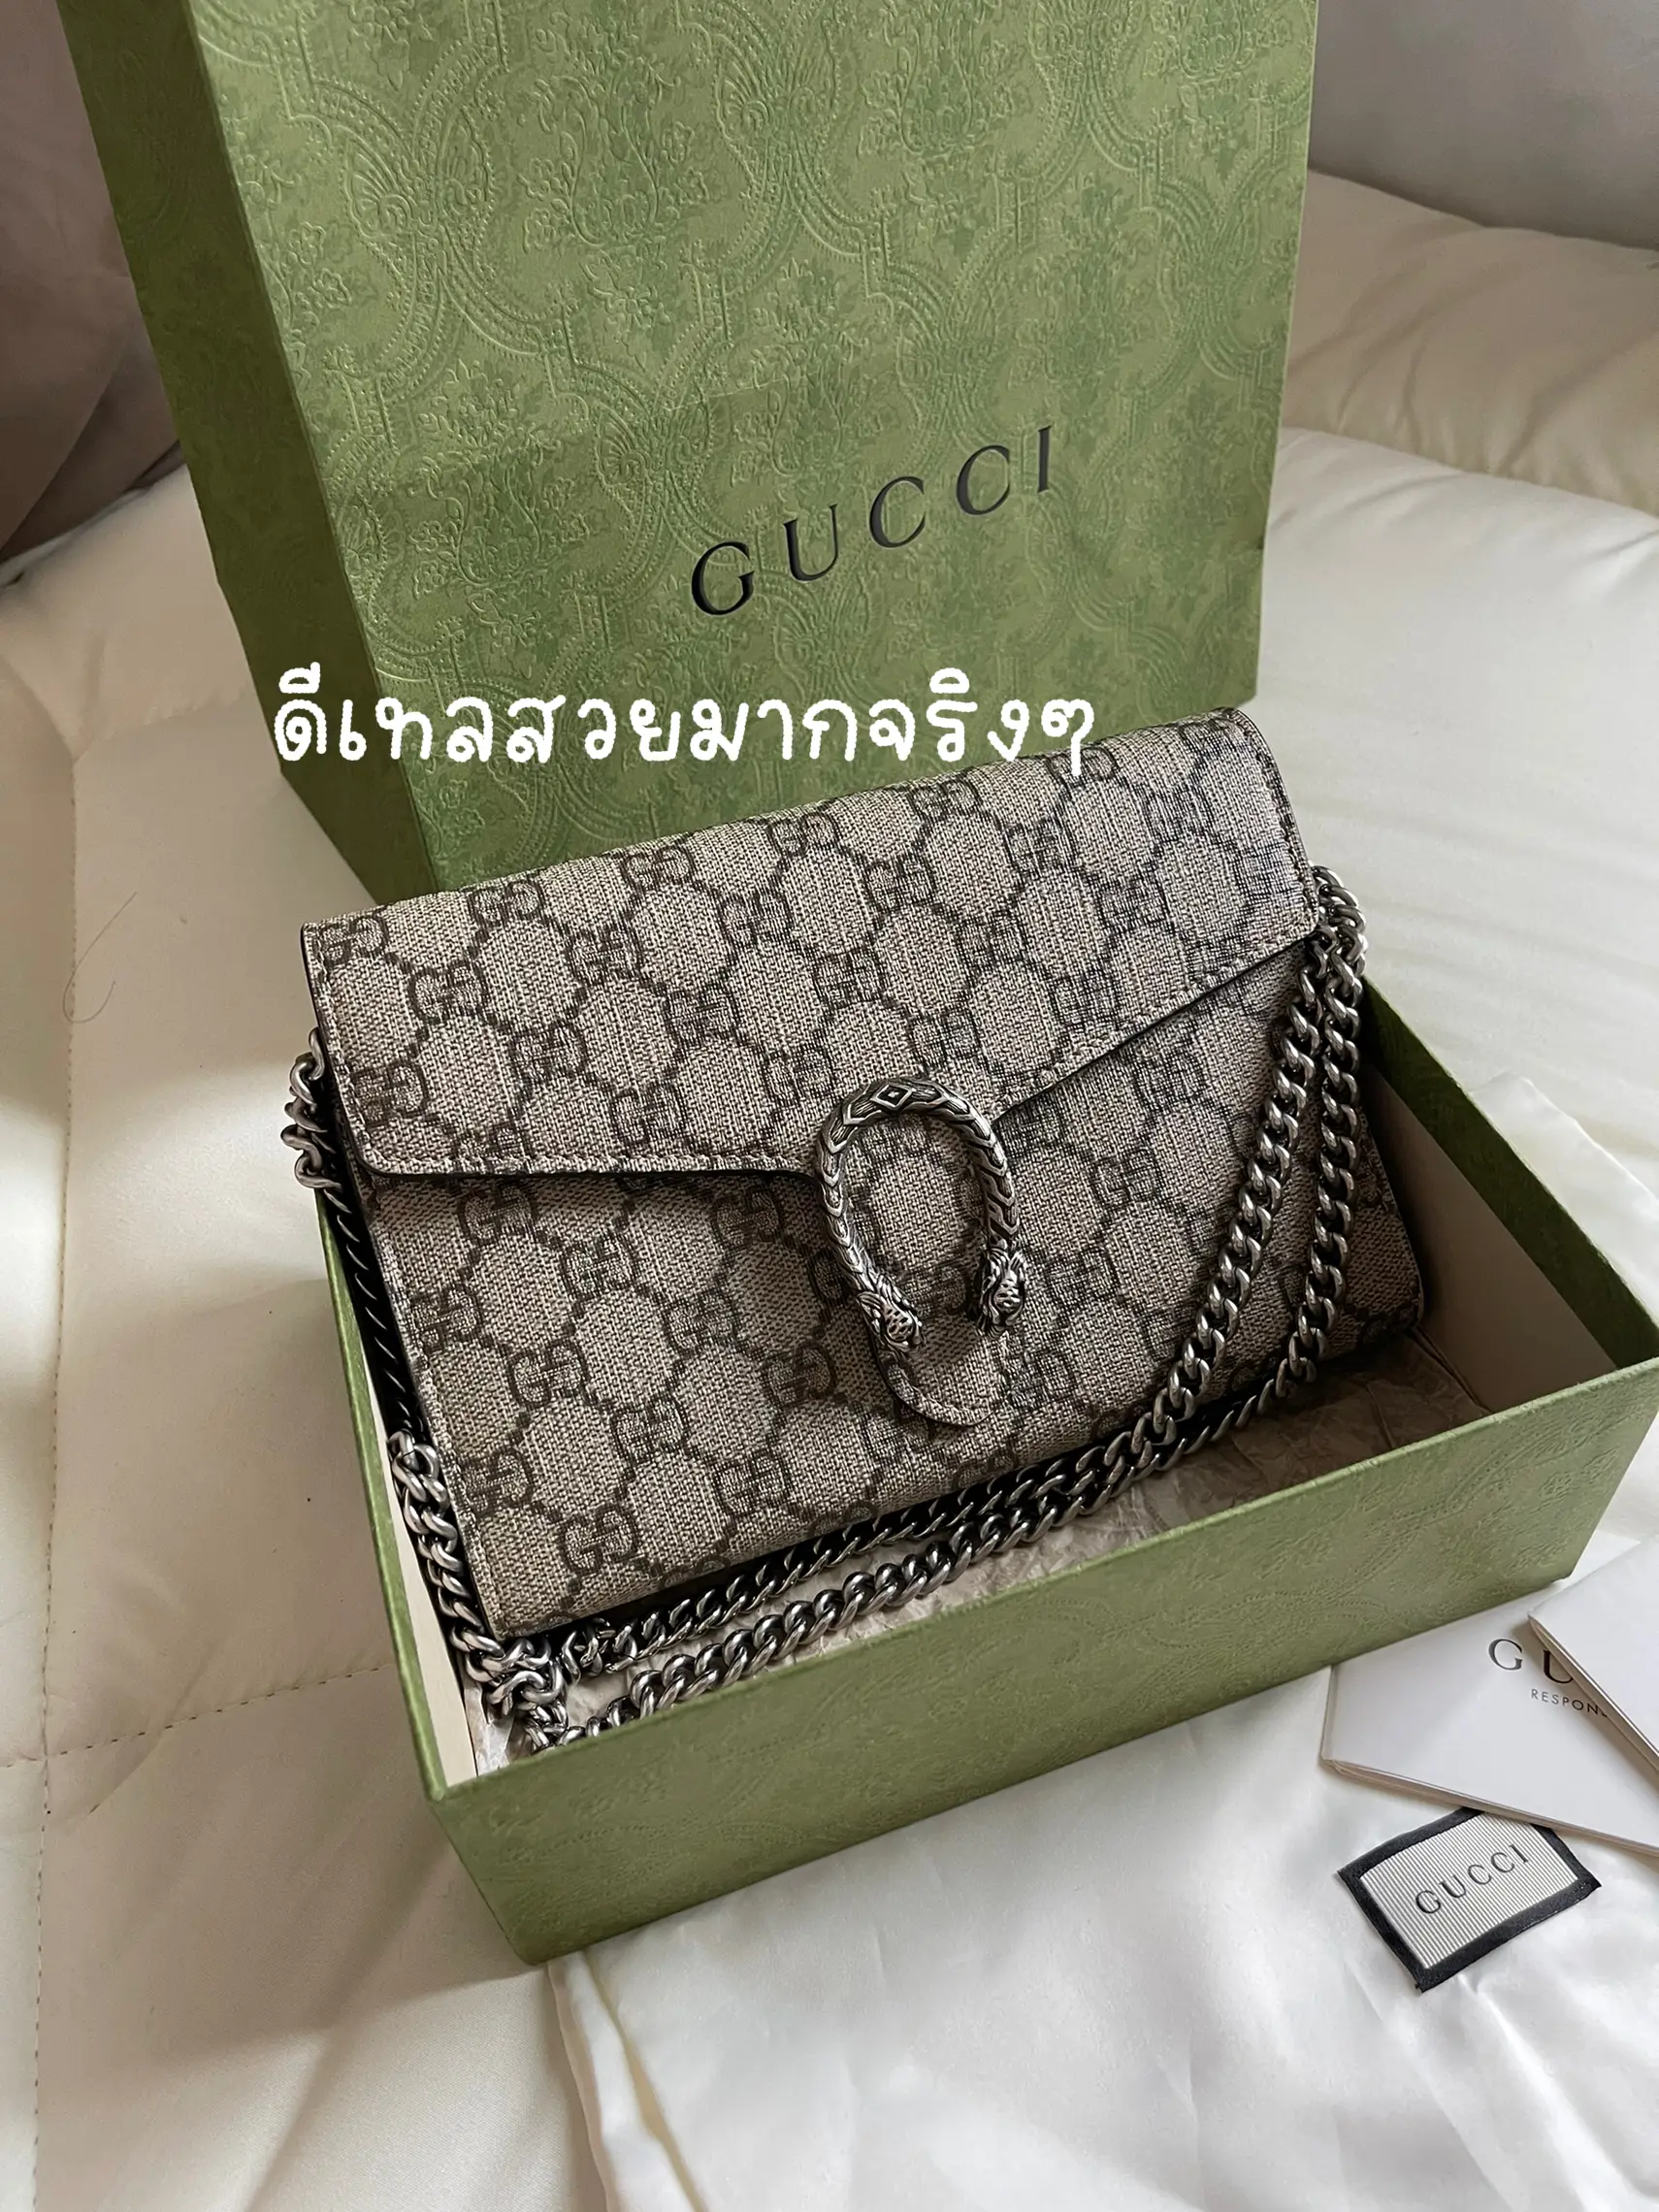 GUCCI DIONYSUS WALLET ON CHAIN review + what fits inside +